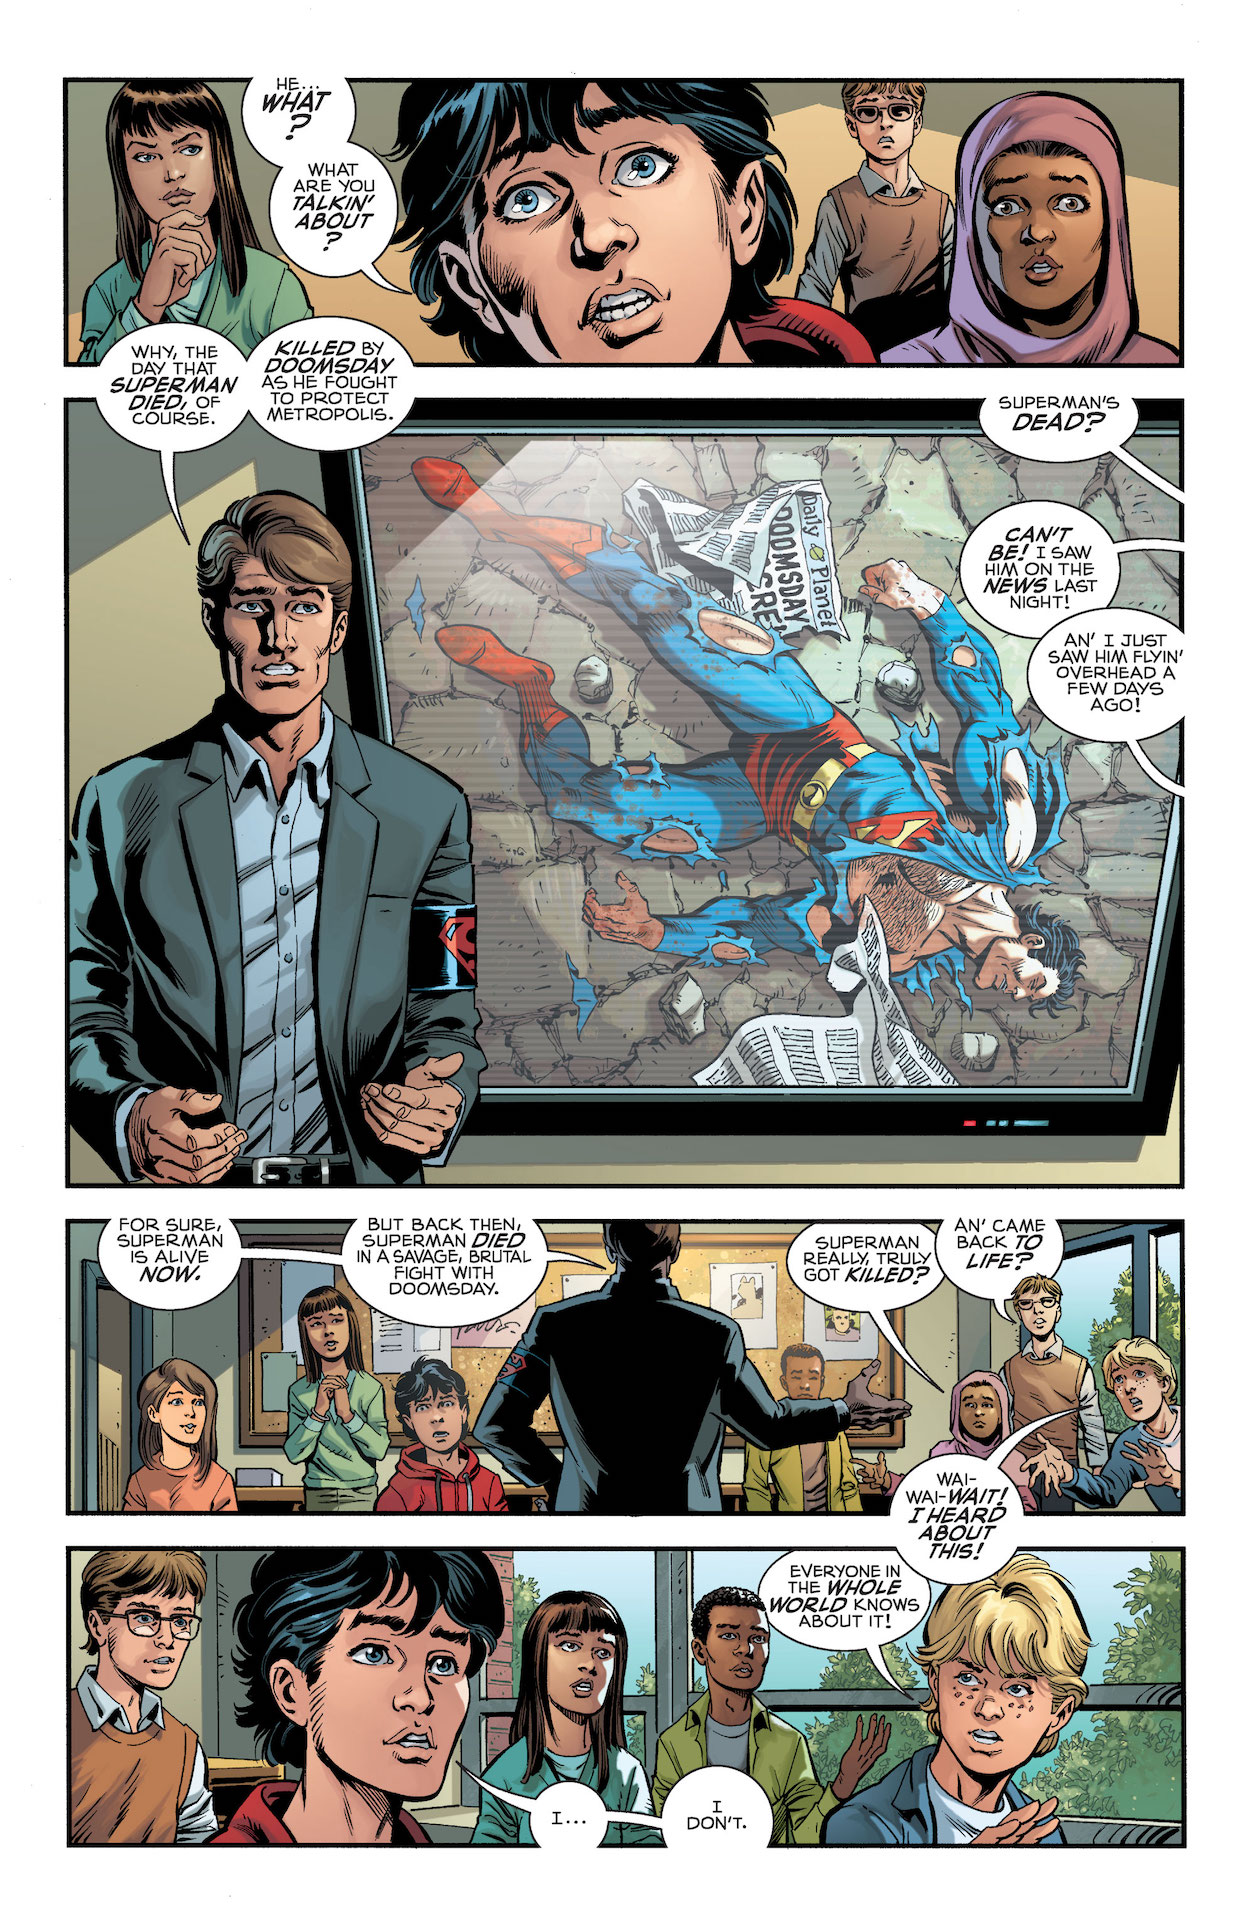 death of superman News, Rumors and Information - Bleeding Cool News And  Rumors Page 1